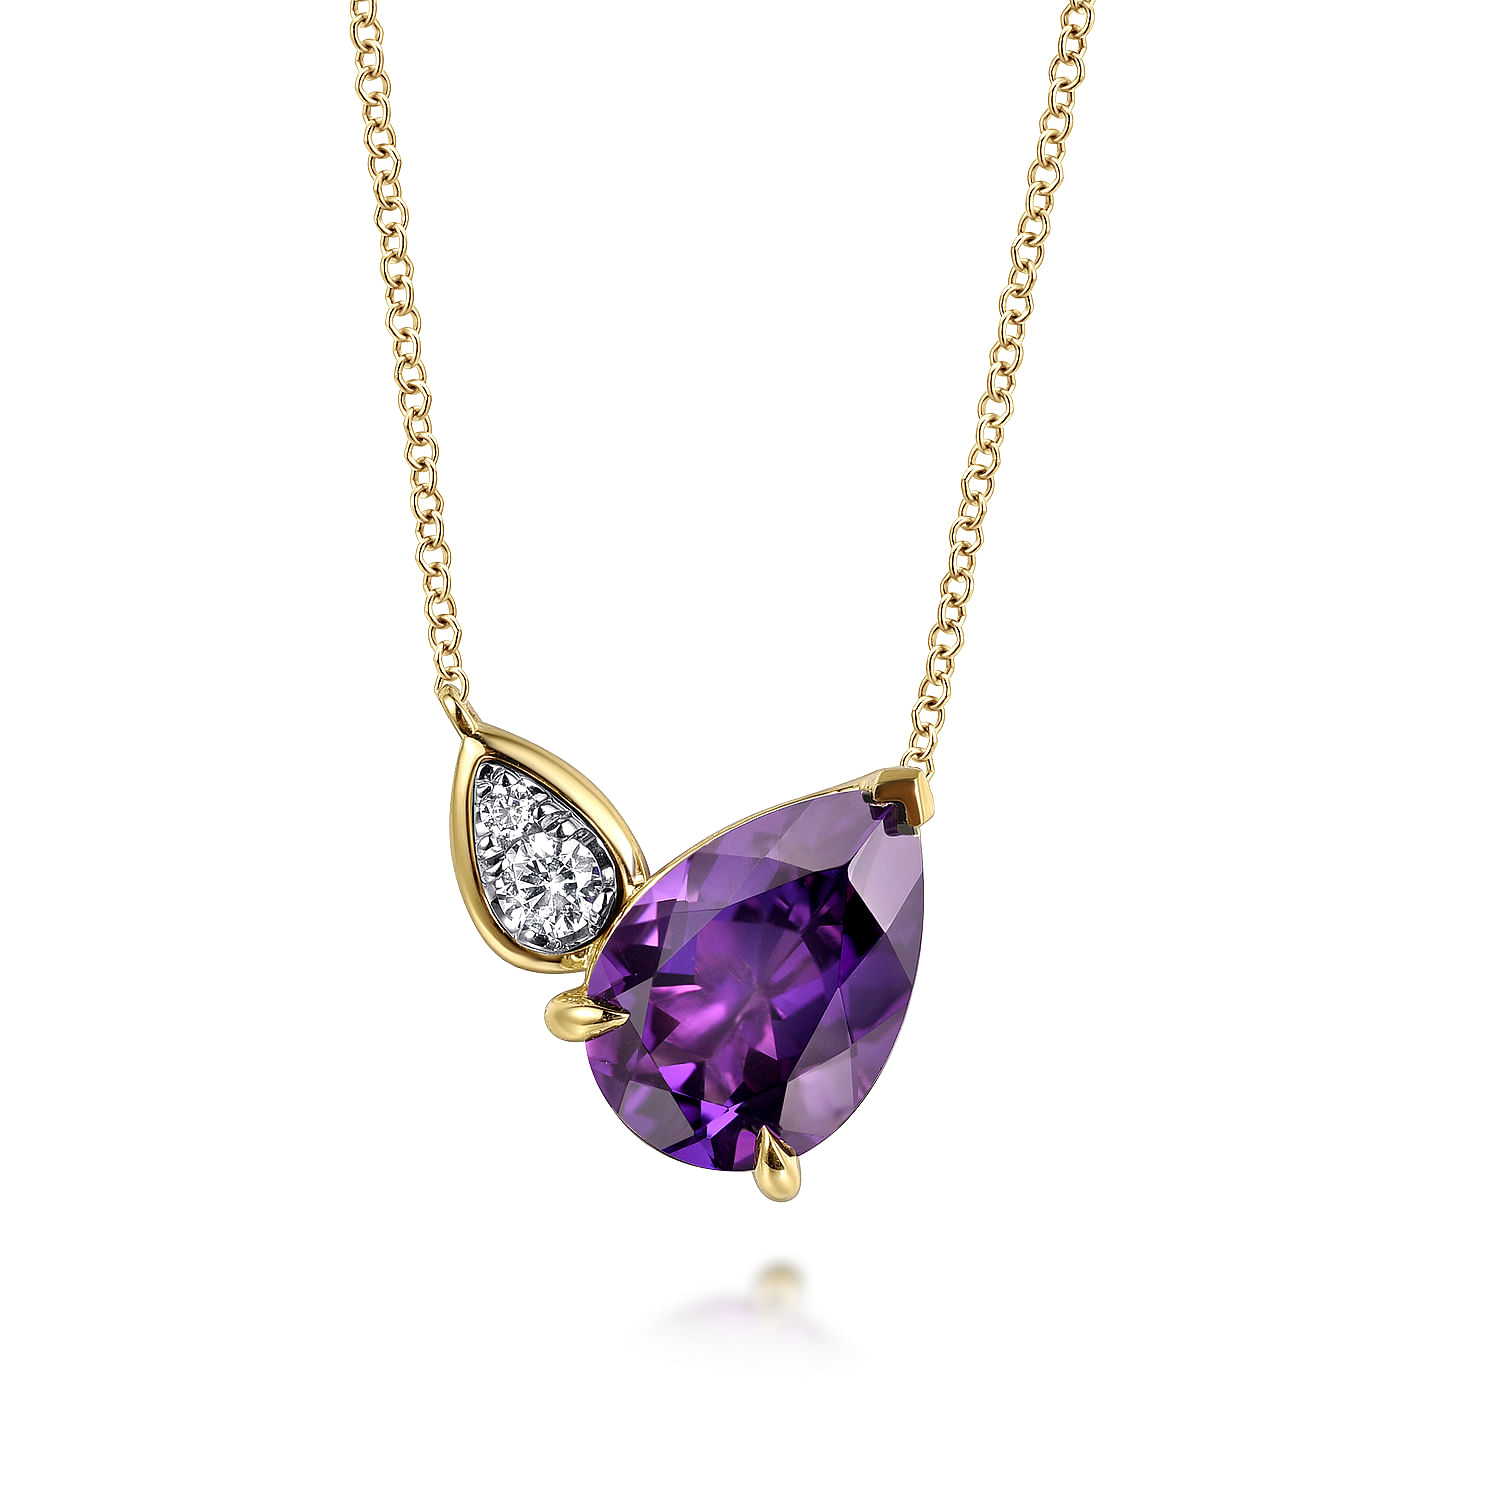 14K White & Yellow Gold Diamond and Amethyst Pendant Necklace